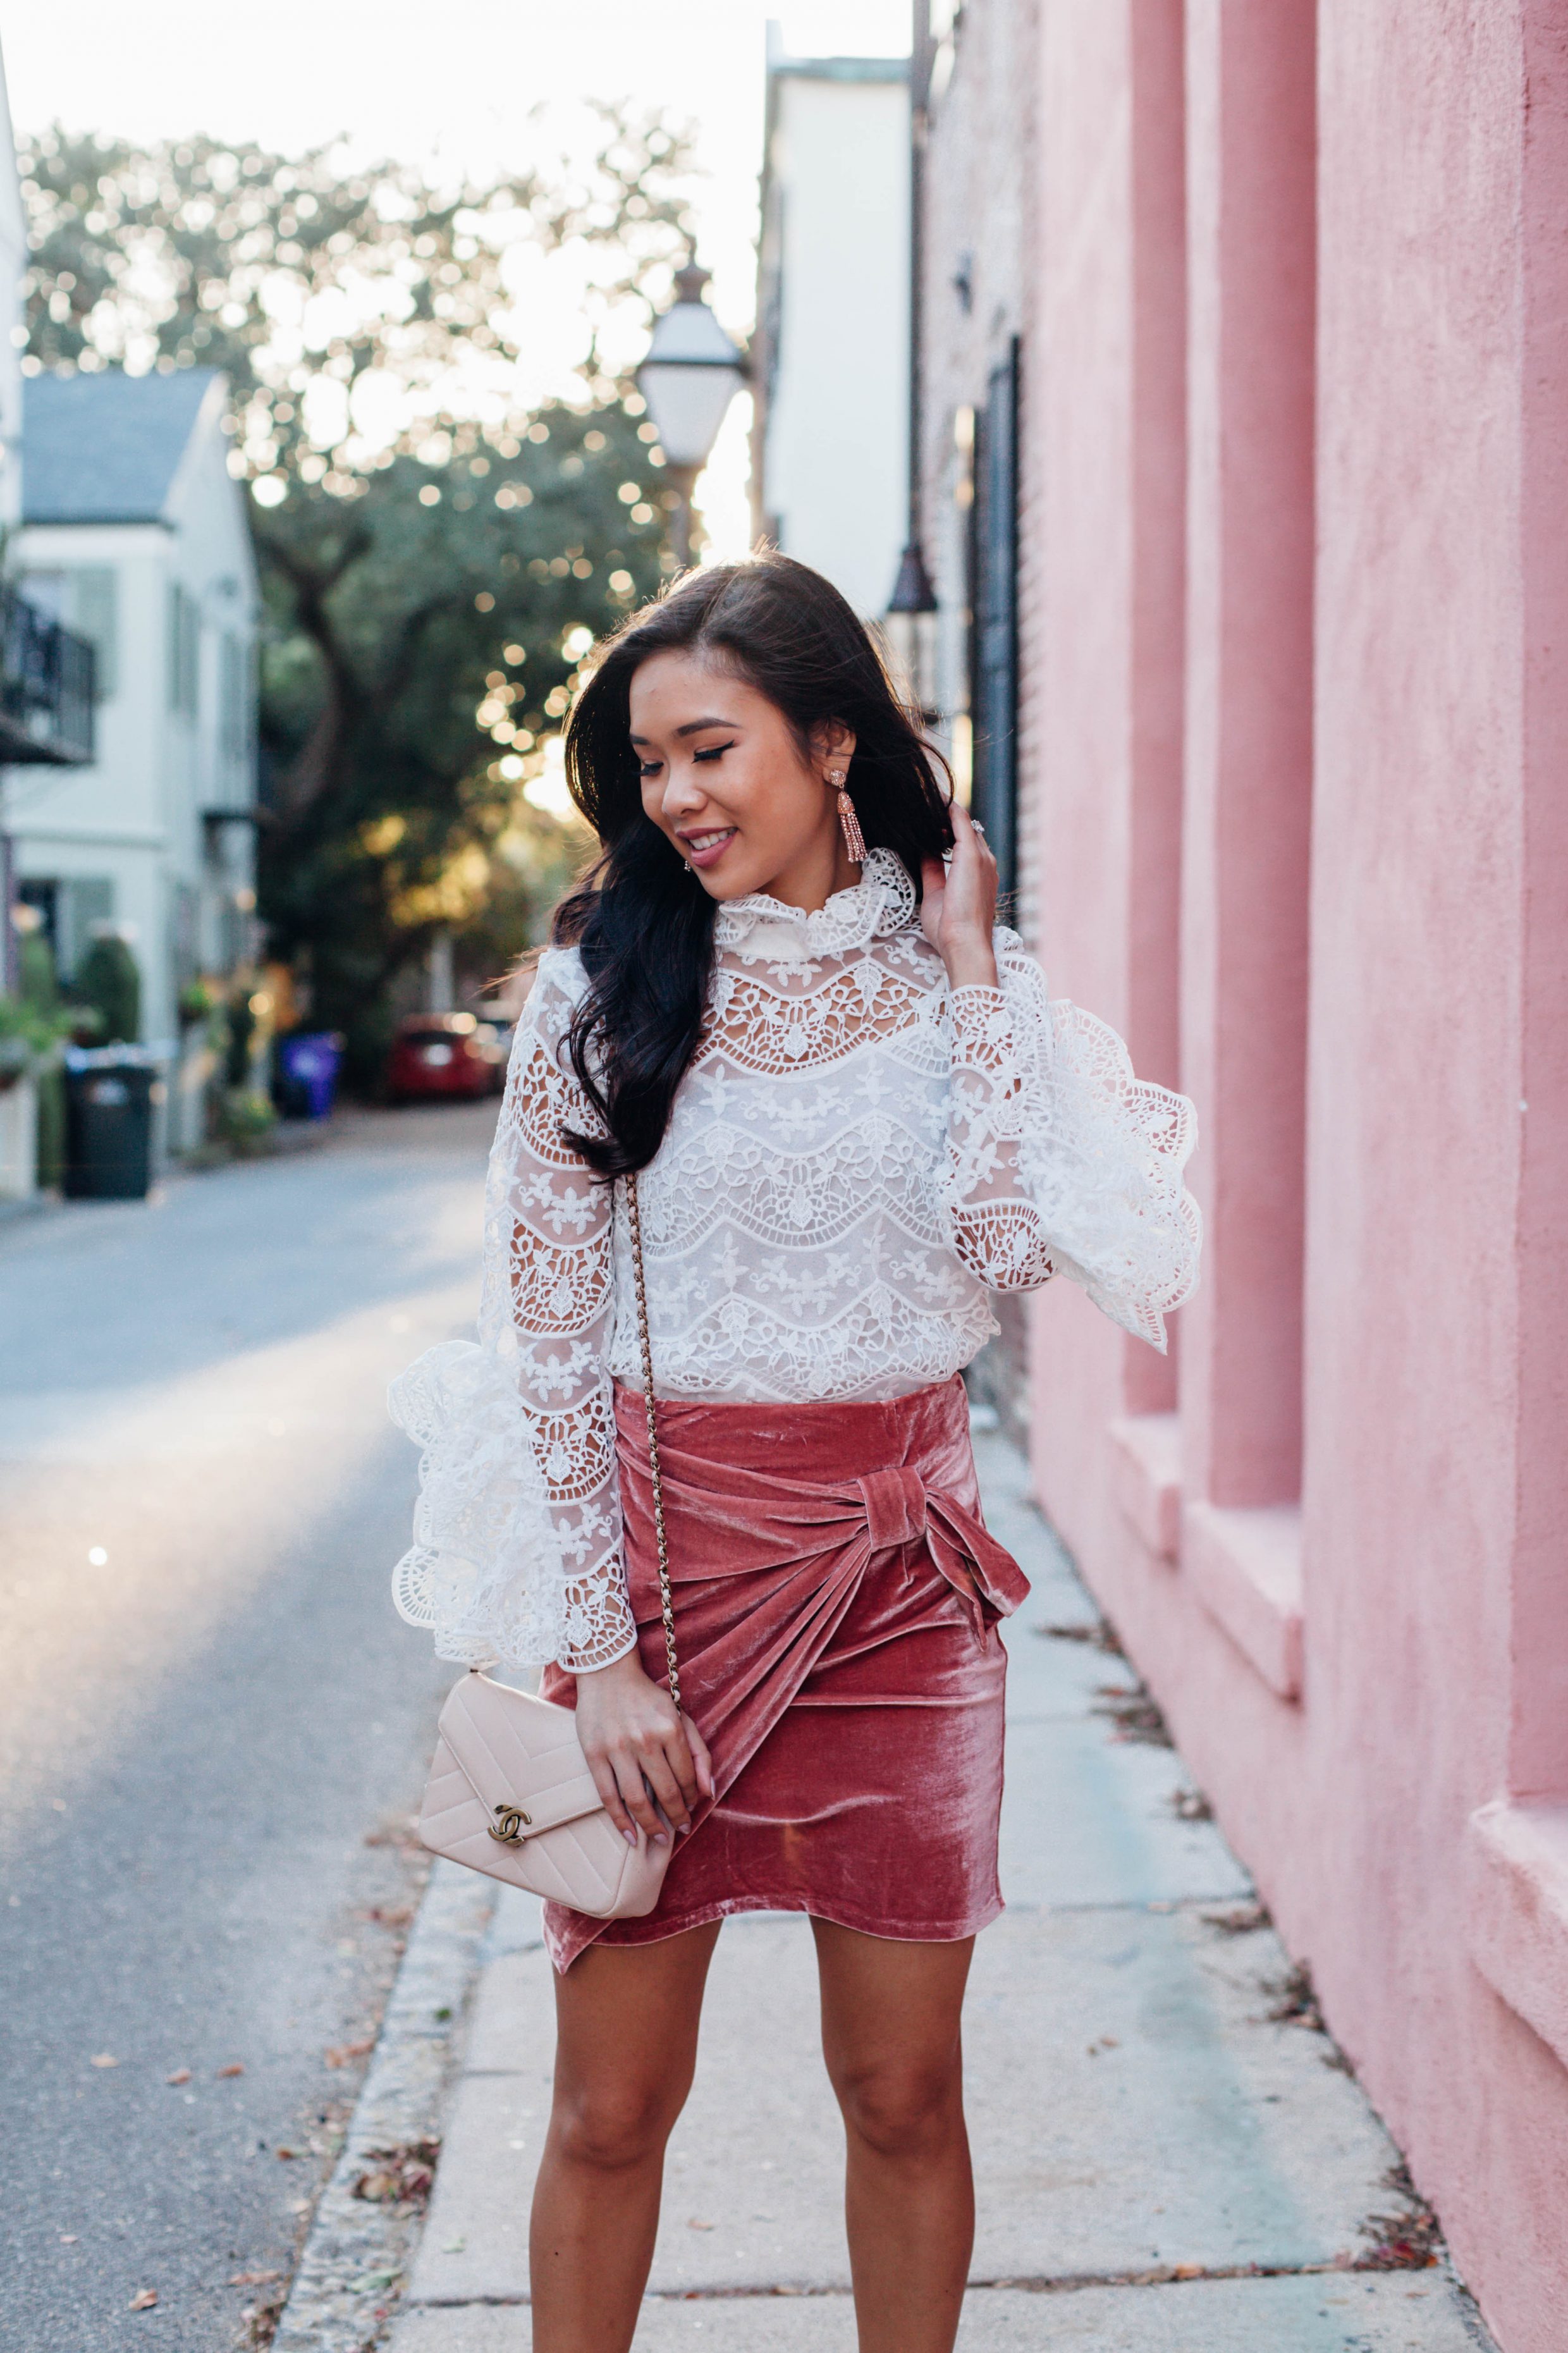 Lace crochet blouse and pink velvet skirt with Chanel bag